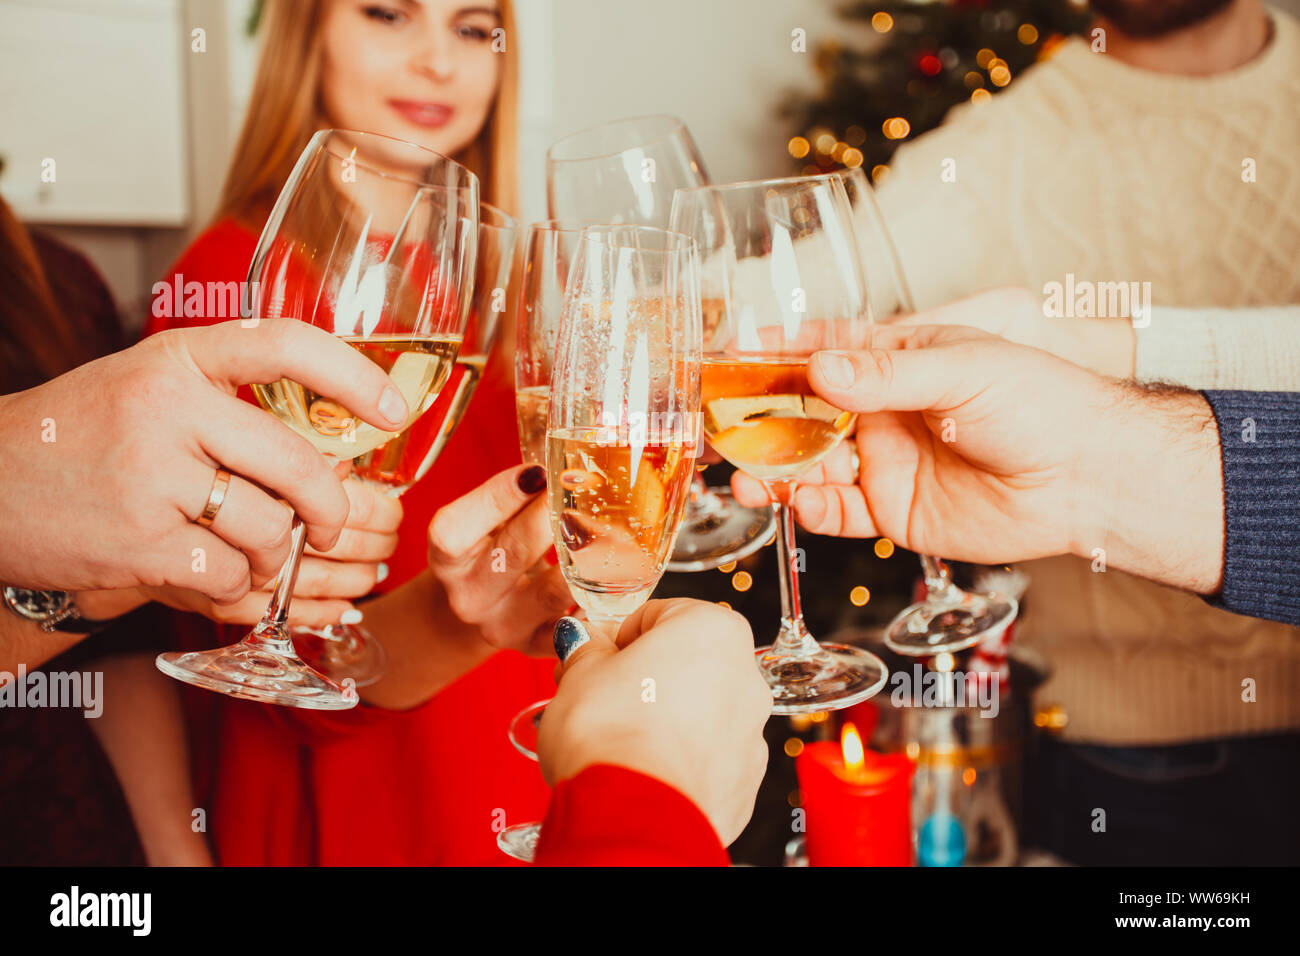 New year or Christmas party at home, brothers and sisters cheering wishing all the best to each other. Close view of hands of young people clinking ch Stock Photo